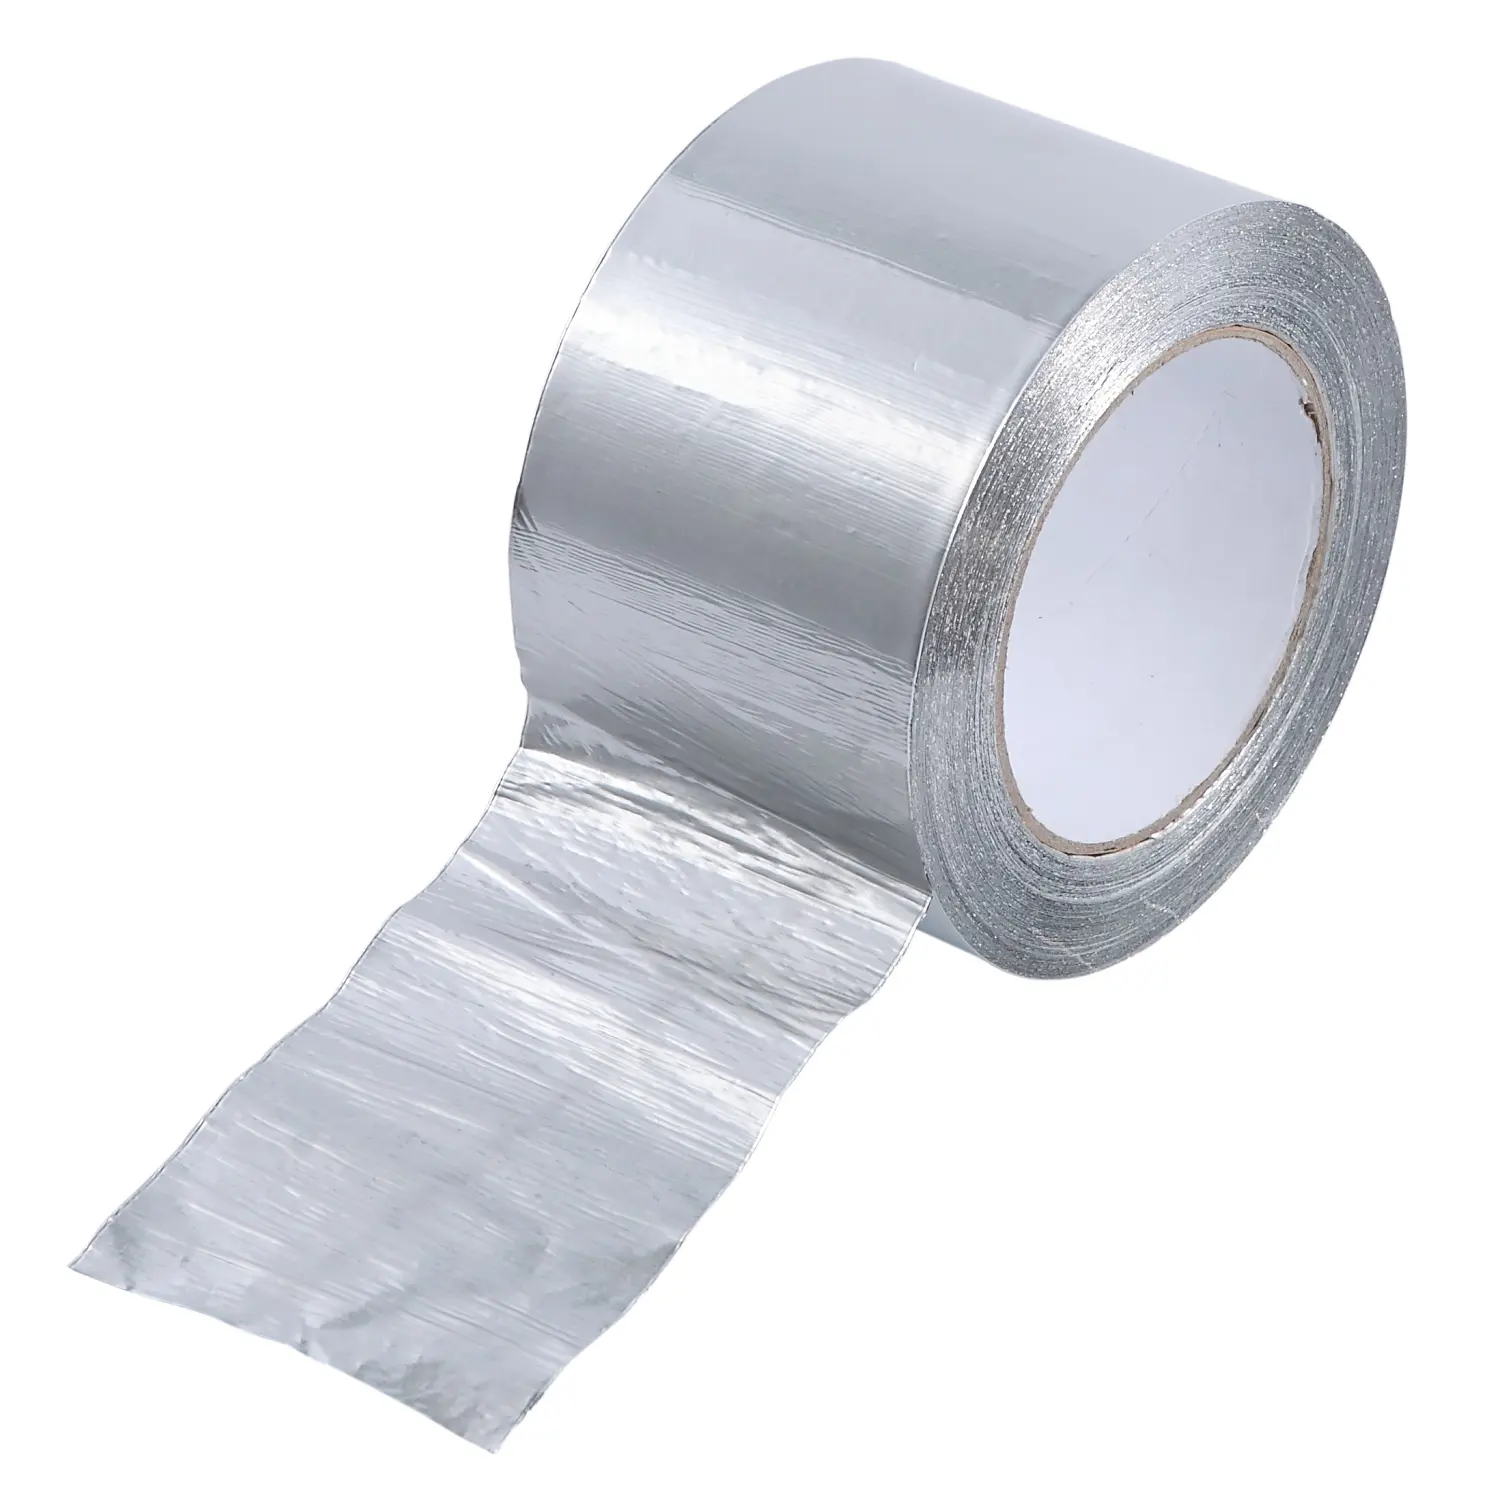 Fireproof Self Adhesive Aluminum Foil Insulation Ductwork Tape Manufacturer